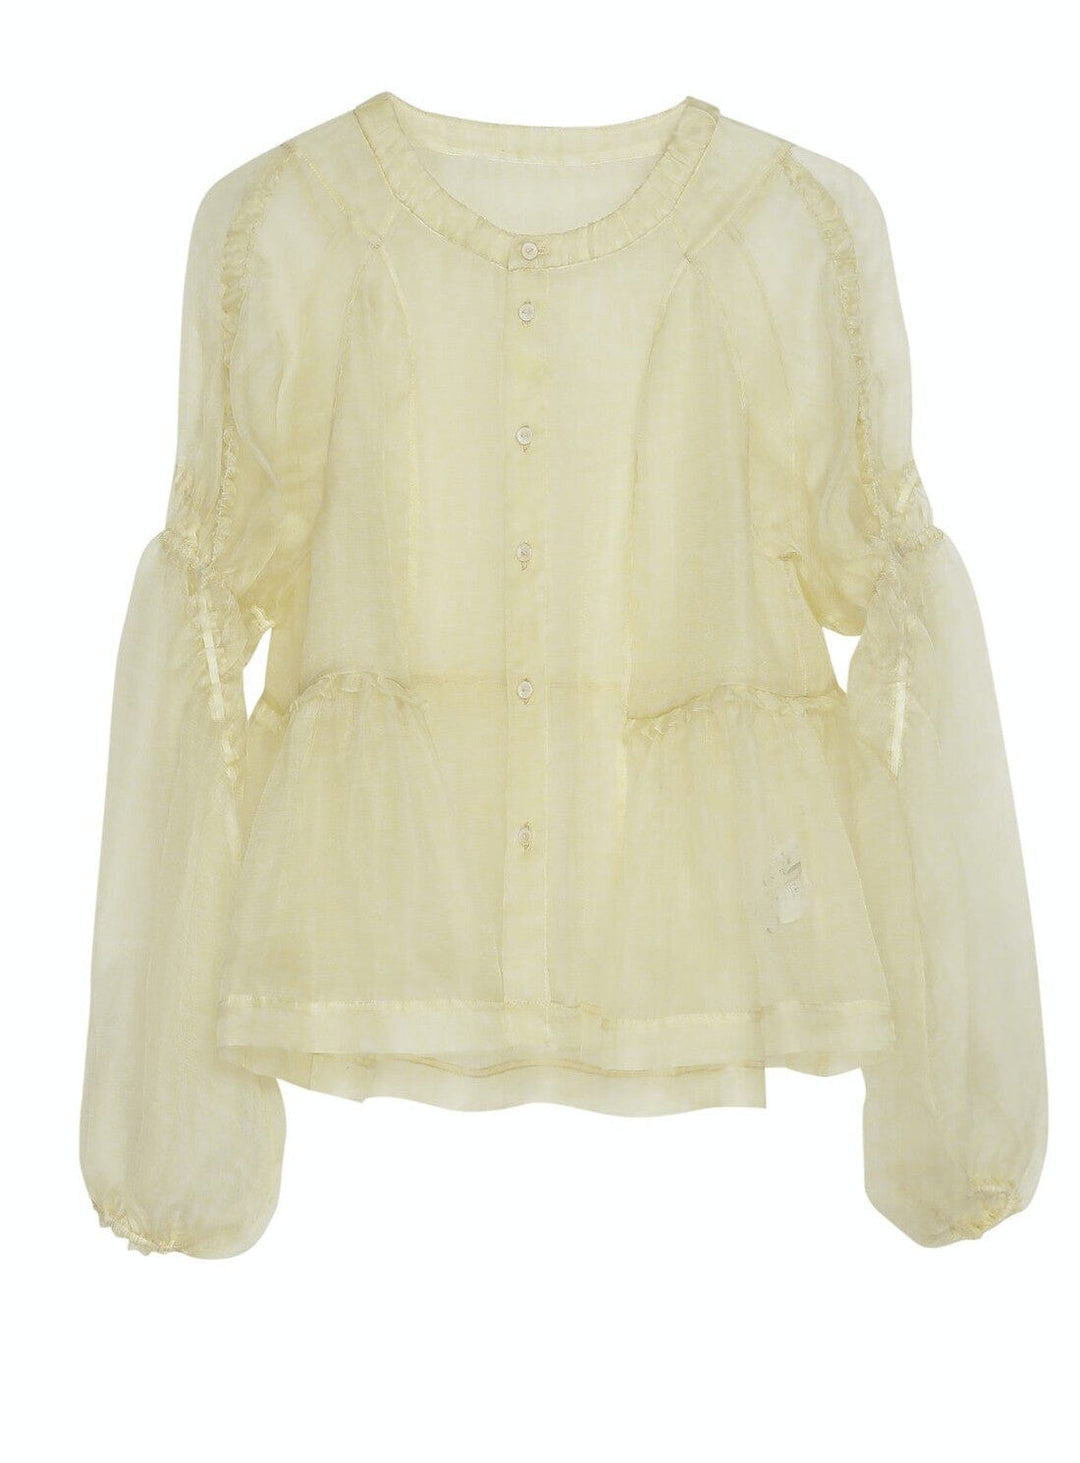 Tulle Silk Tops in Yellow Tops YBDFinds 